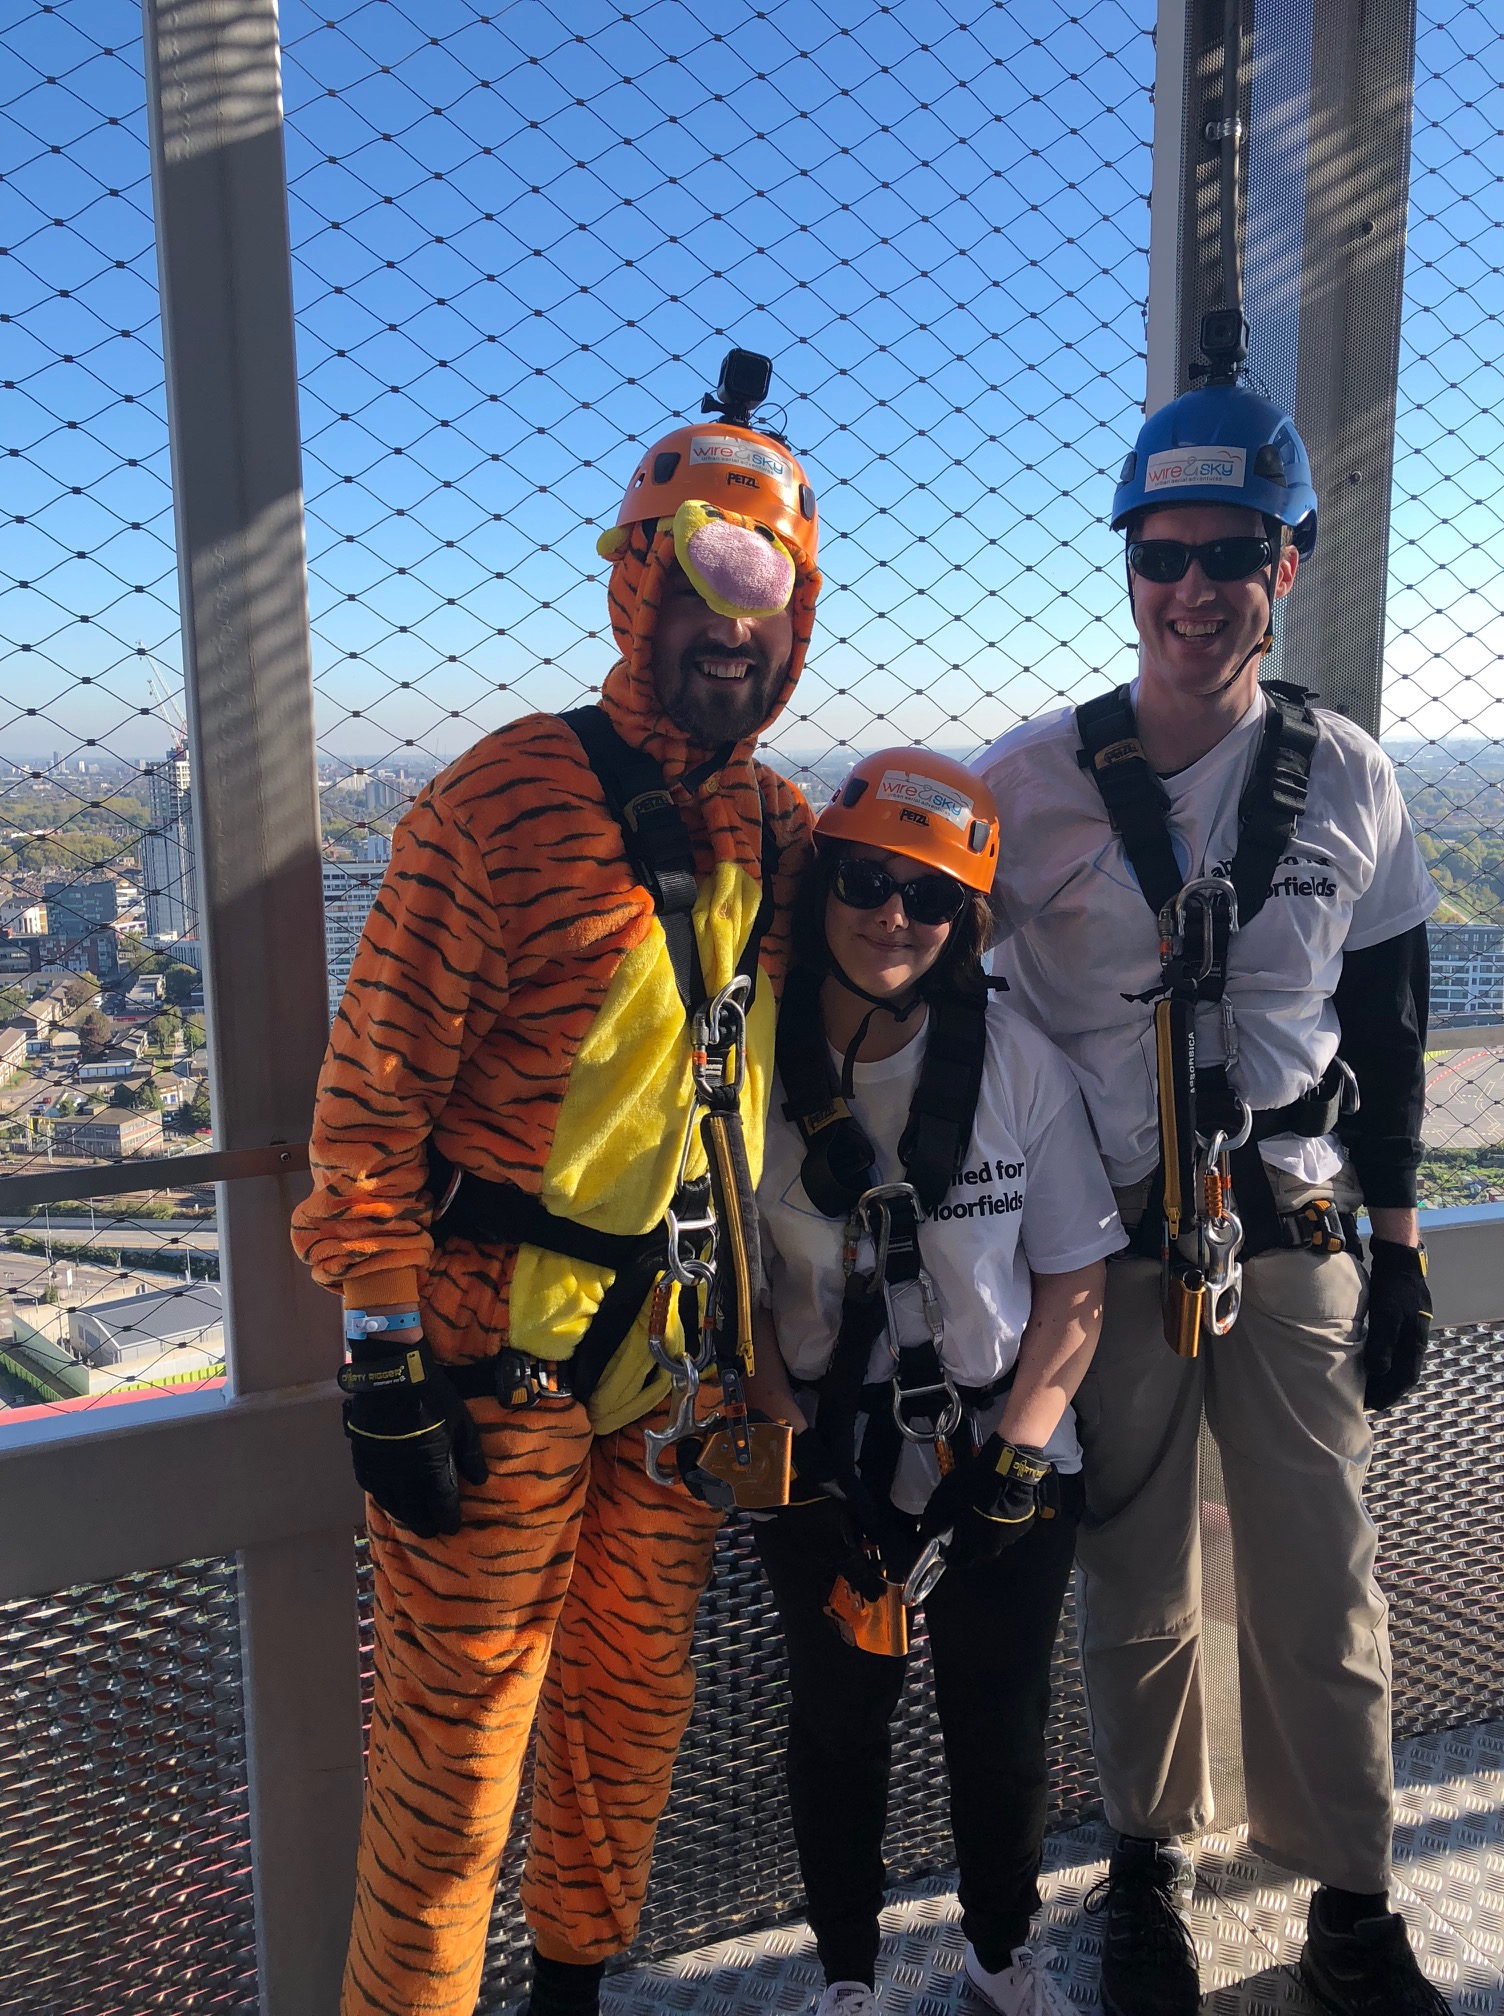 Matt, Claire and Glen ready to abseil in their harnesses and helmets. Matt and Glen also have GoPro cameras attached to their helmets. Glen and Claire are wearing their Moorfields Eye Charity t-shirts and normal trousers, but Matt is wearing an orange furry Tigger bodysuit, to look like the character from the Winnie The Pooh stories, with black tiger stripes, a yellow chest, and a big round grey nose poking out from under his helmet.